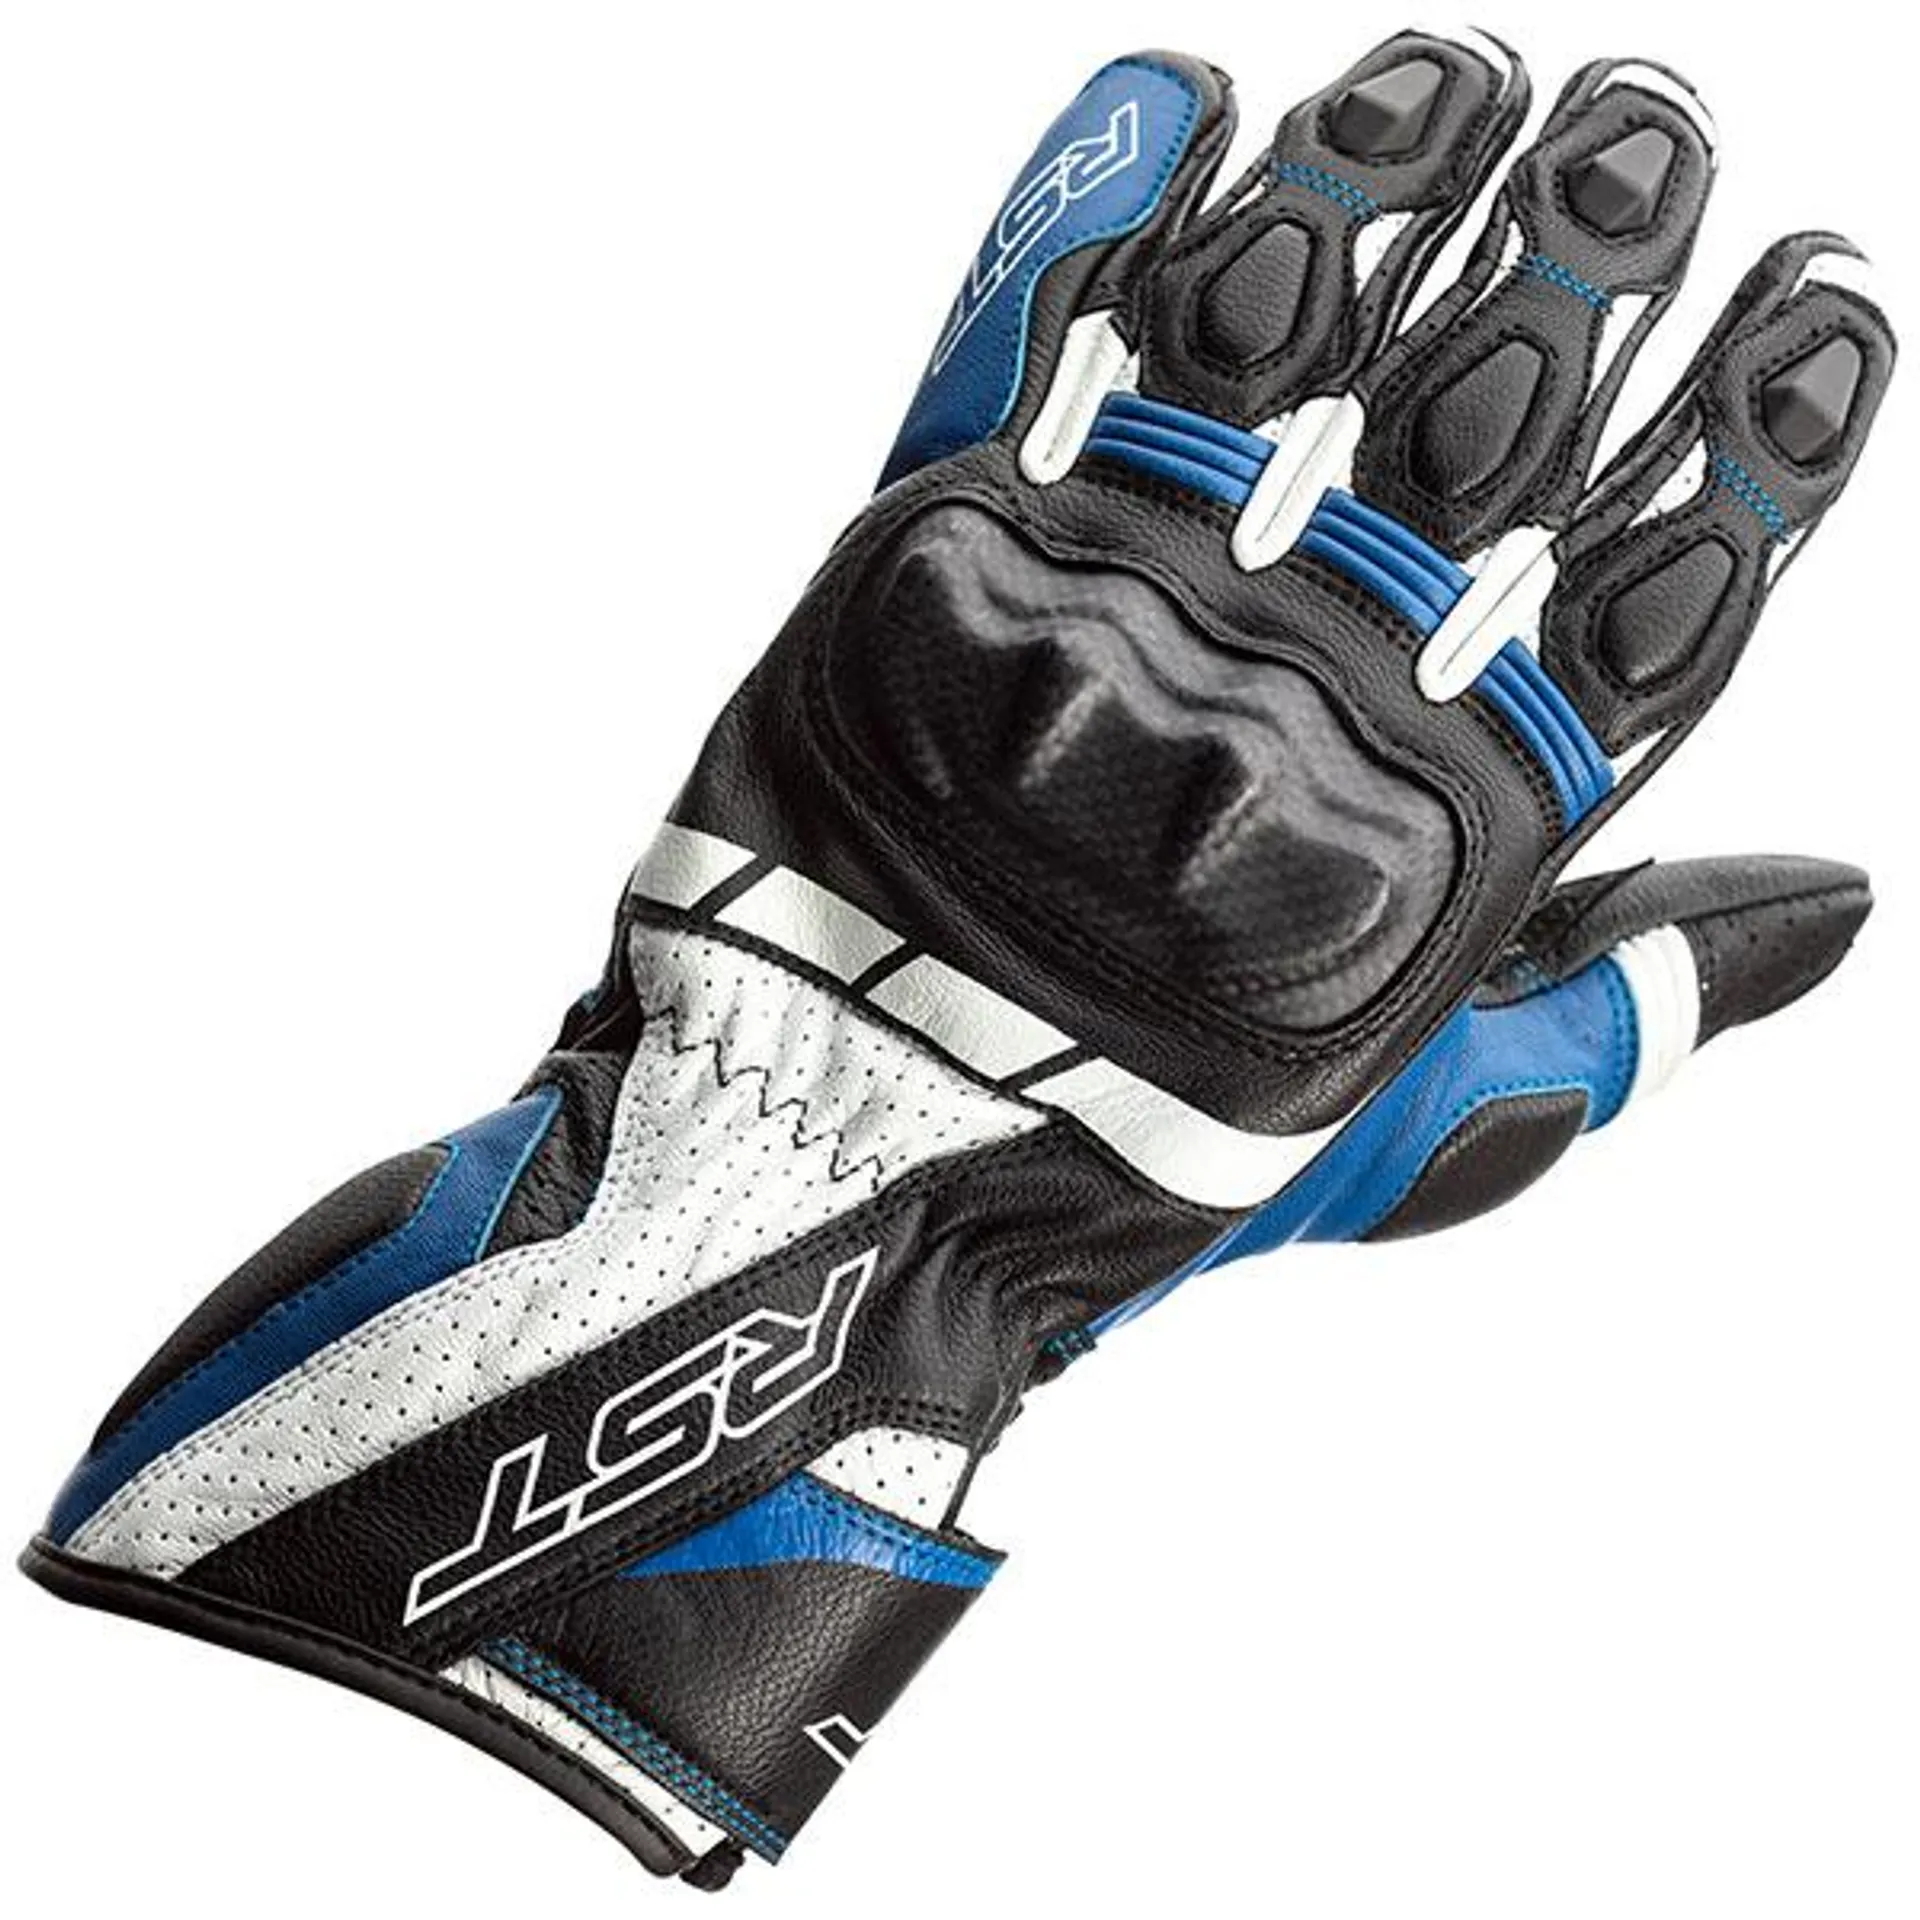 RST Axis CE Leather Gloves - Black / Blue / White